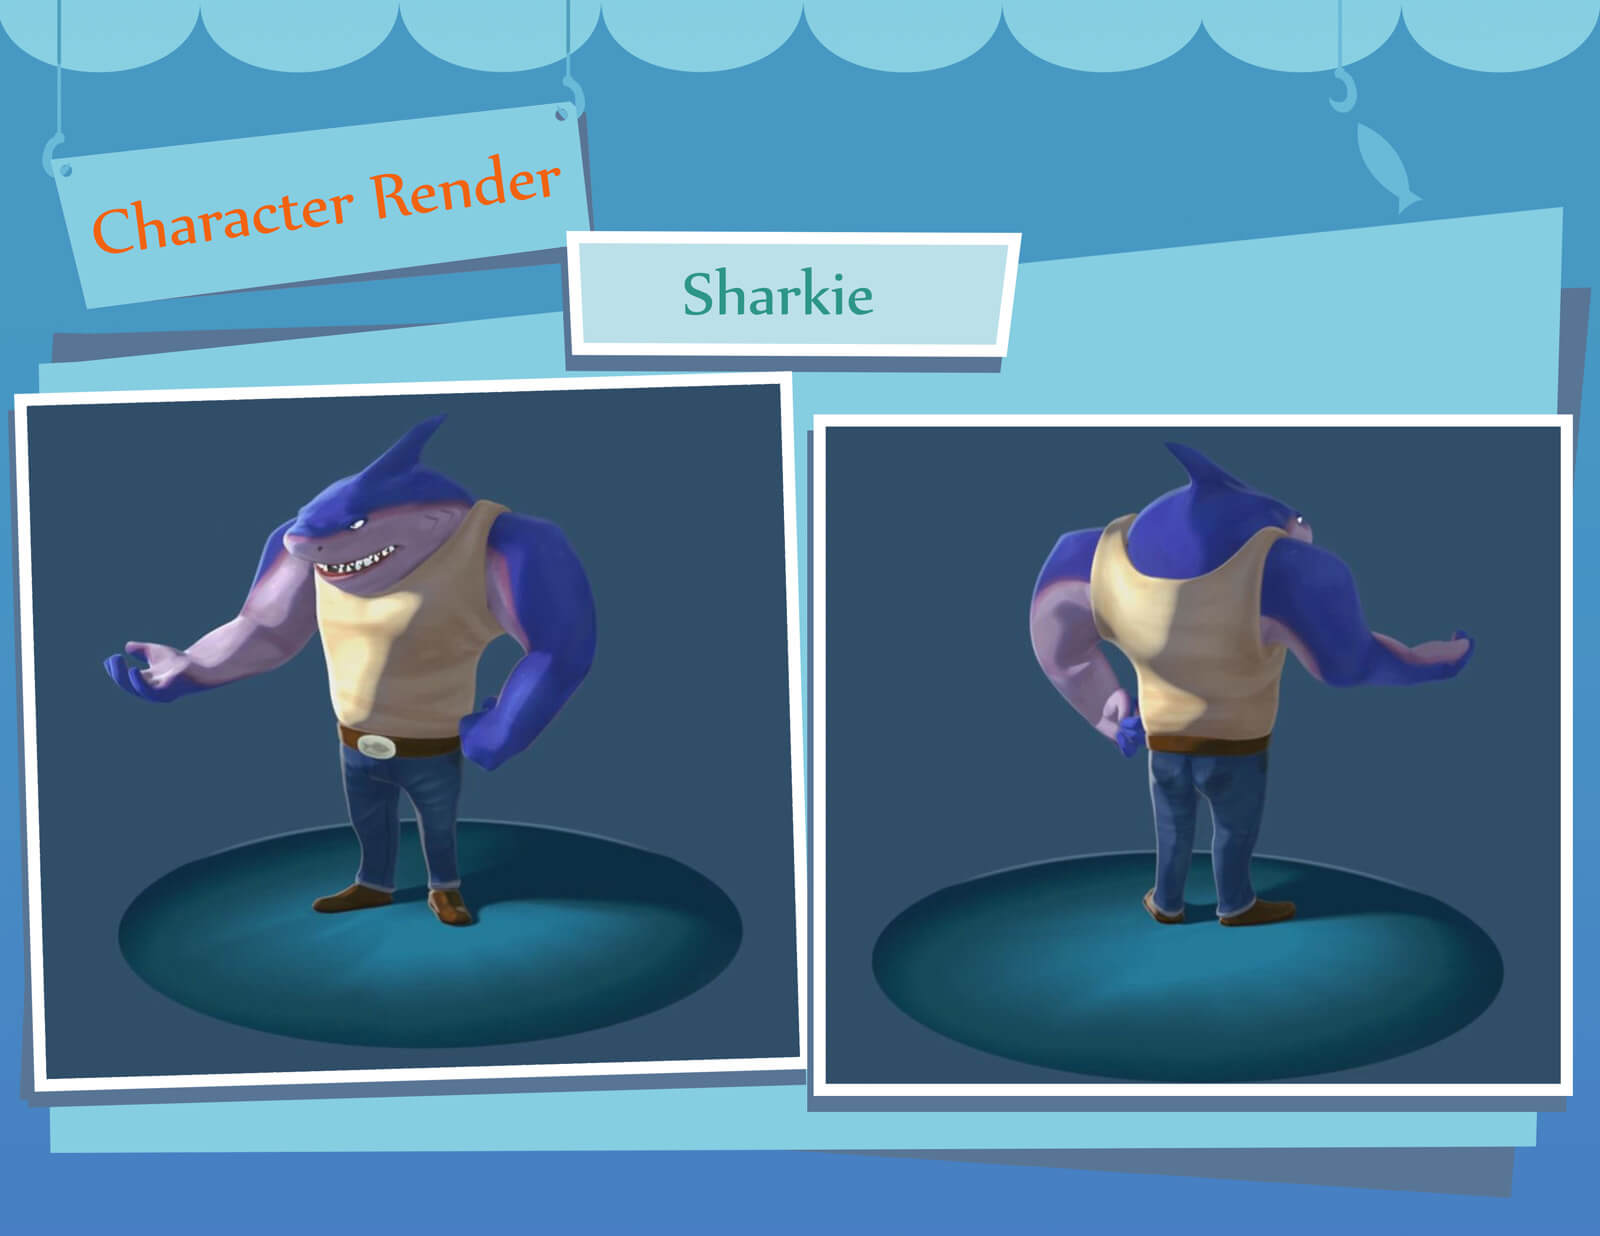 A fully rendered 3D model of a purple shark in jeans and a white shirt labeled "Sharkie"